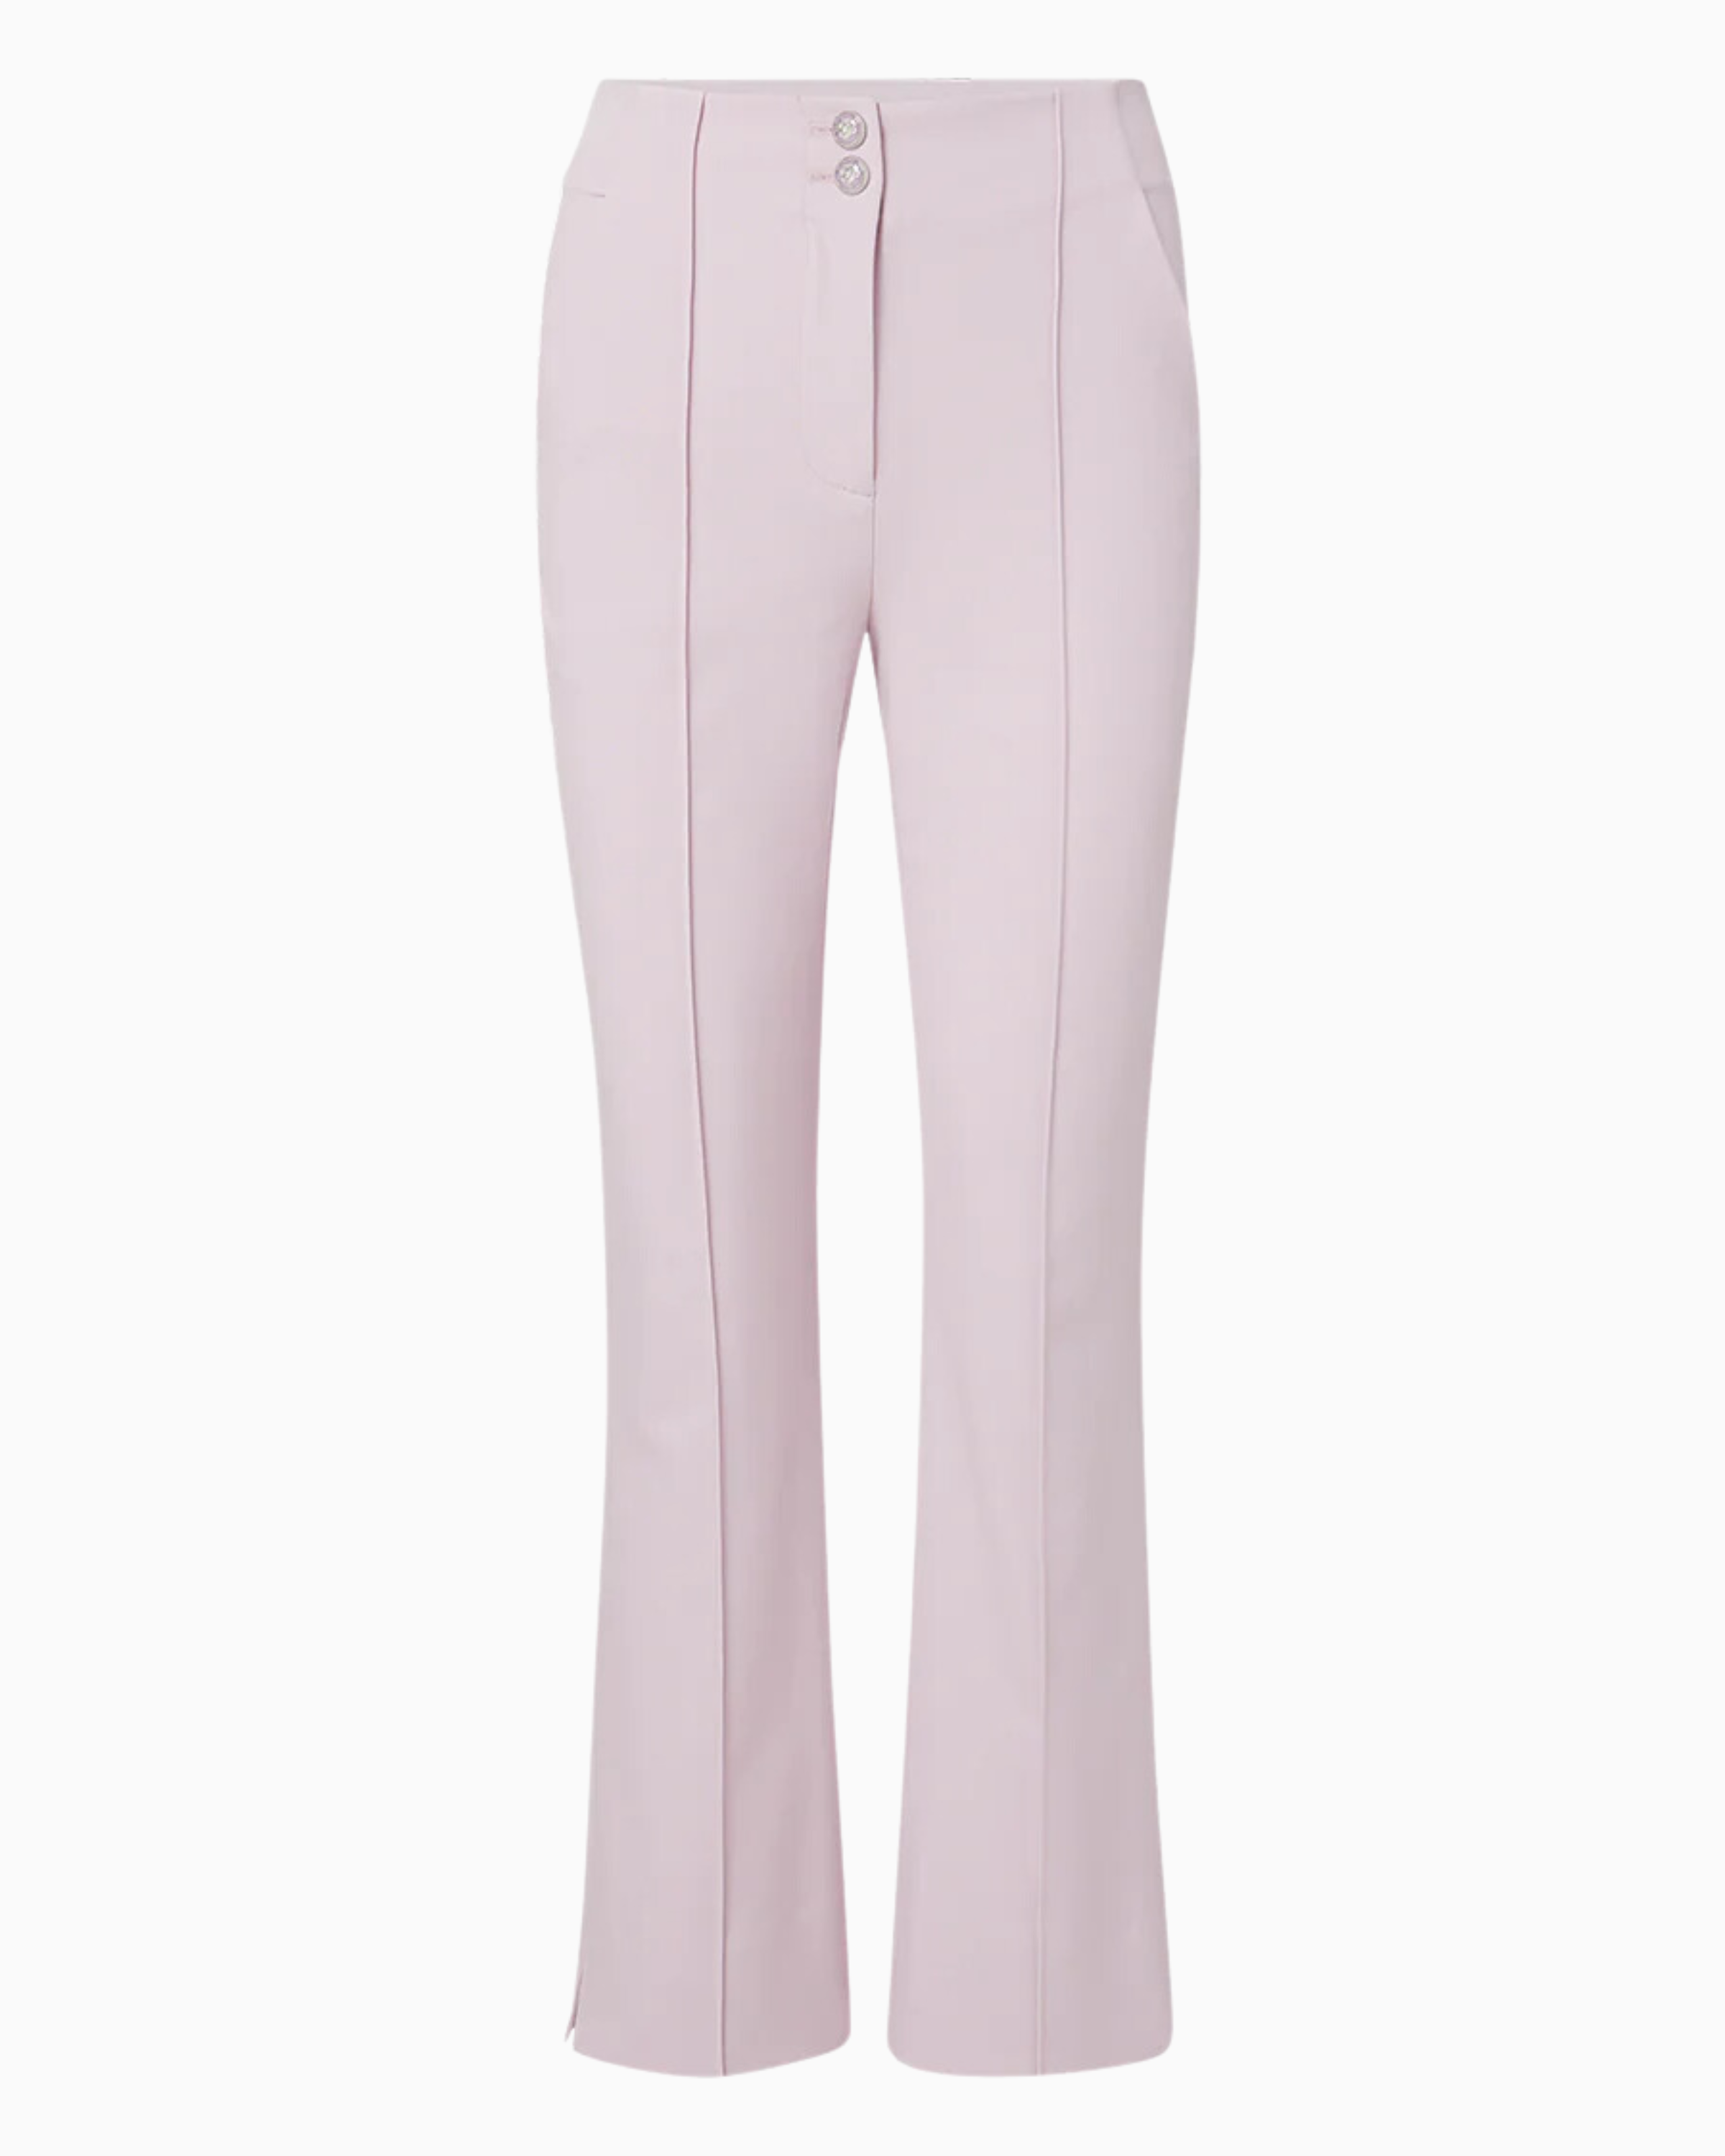 Veronica Beard Kean Pant in Barely Orchid